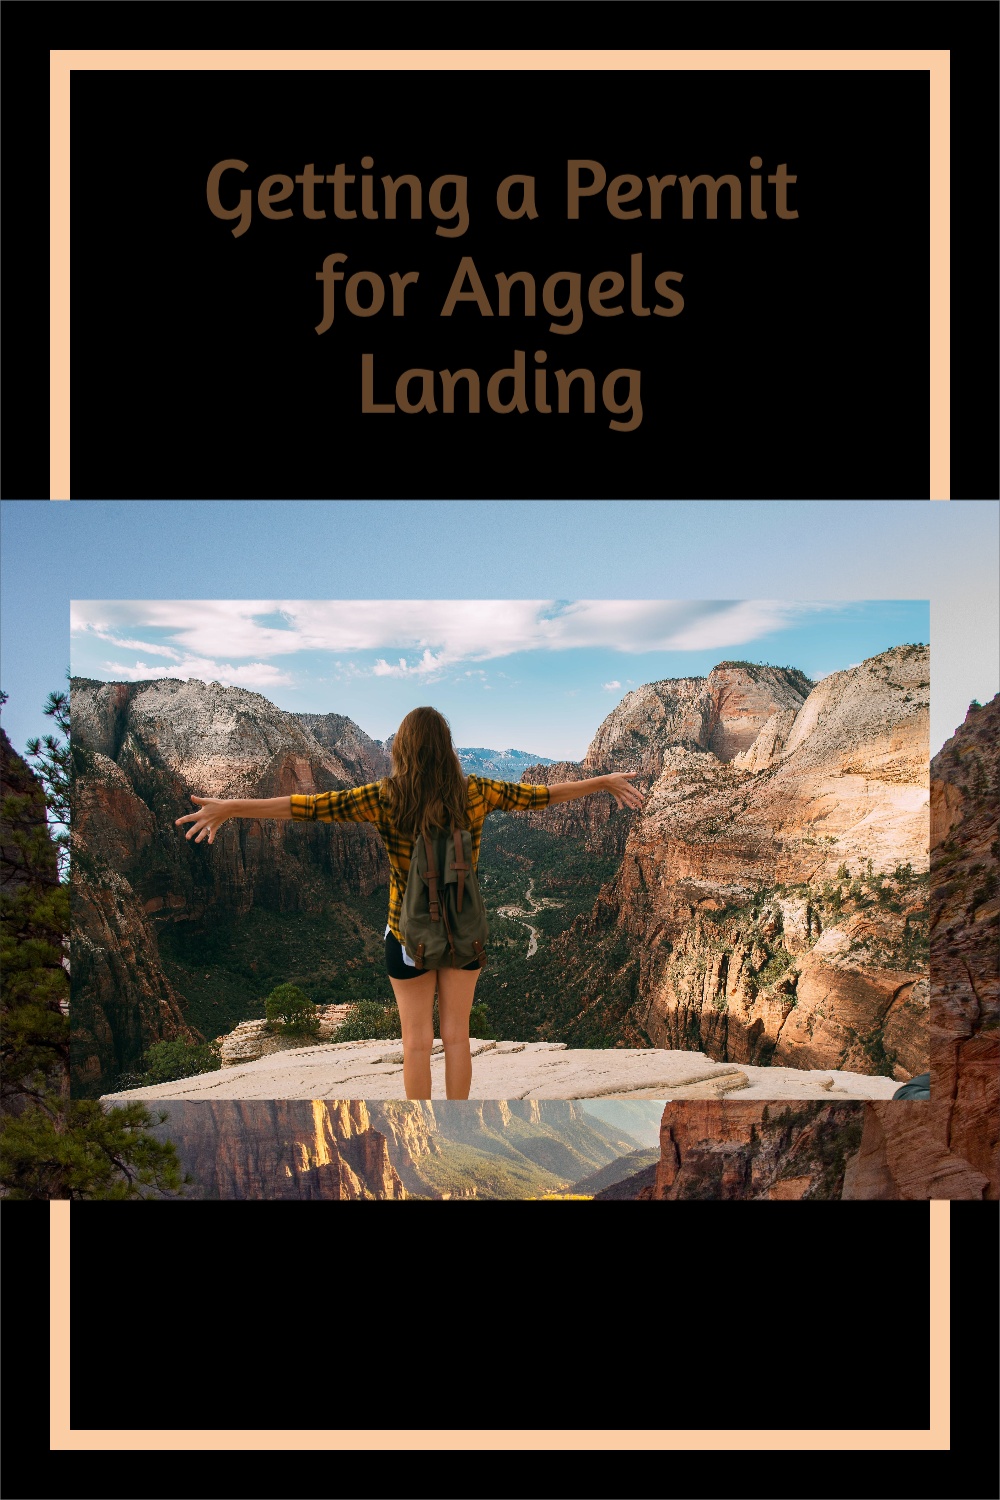 How to get a permit to hike Angels landing in zion national park #alicesadentures #zion #angelslanding #hiking